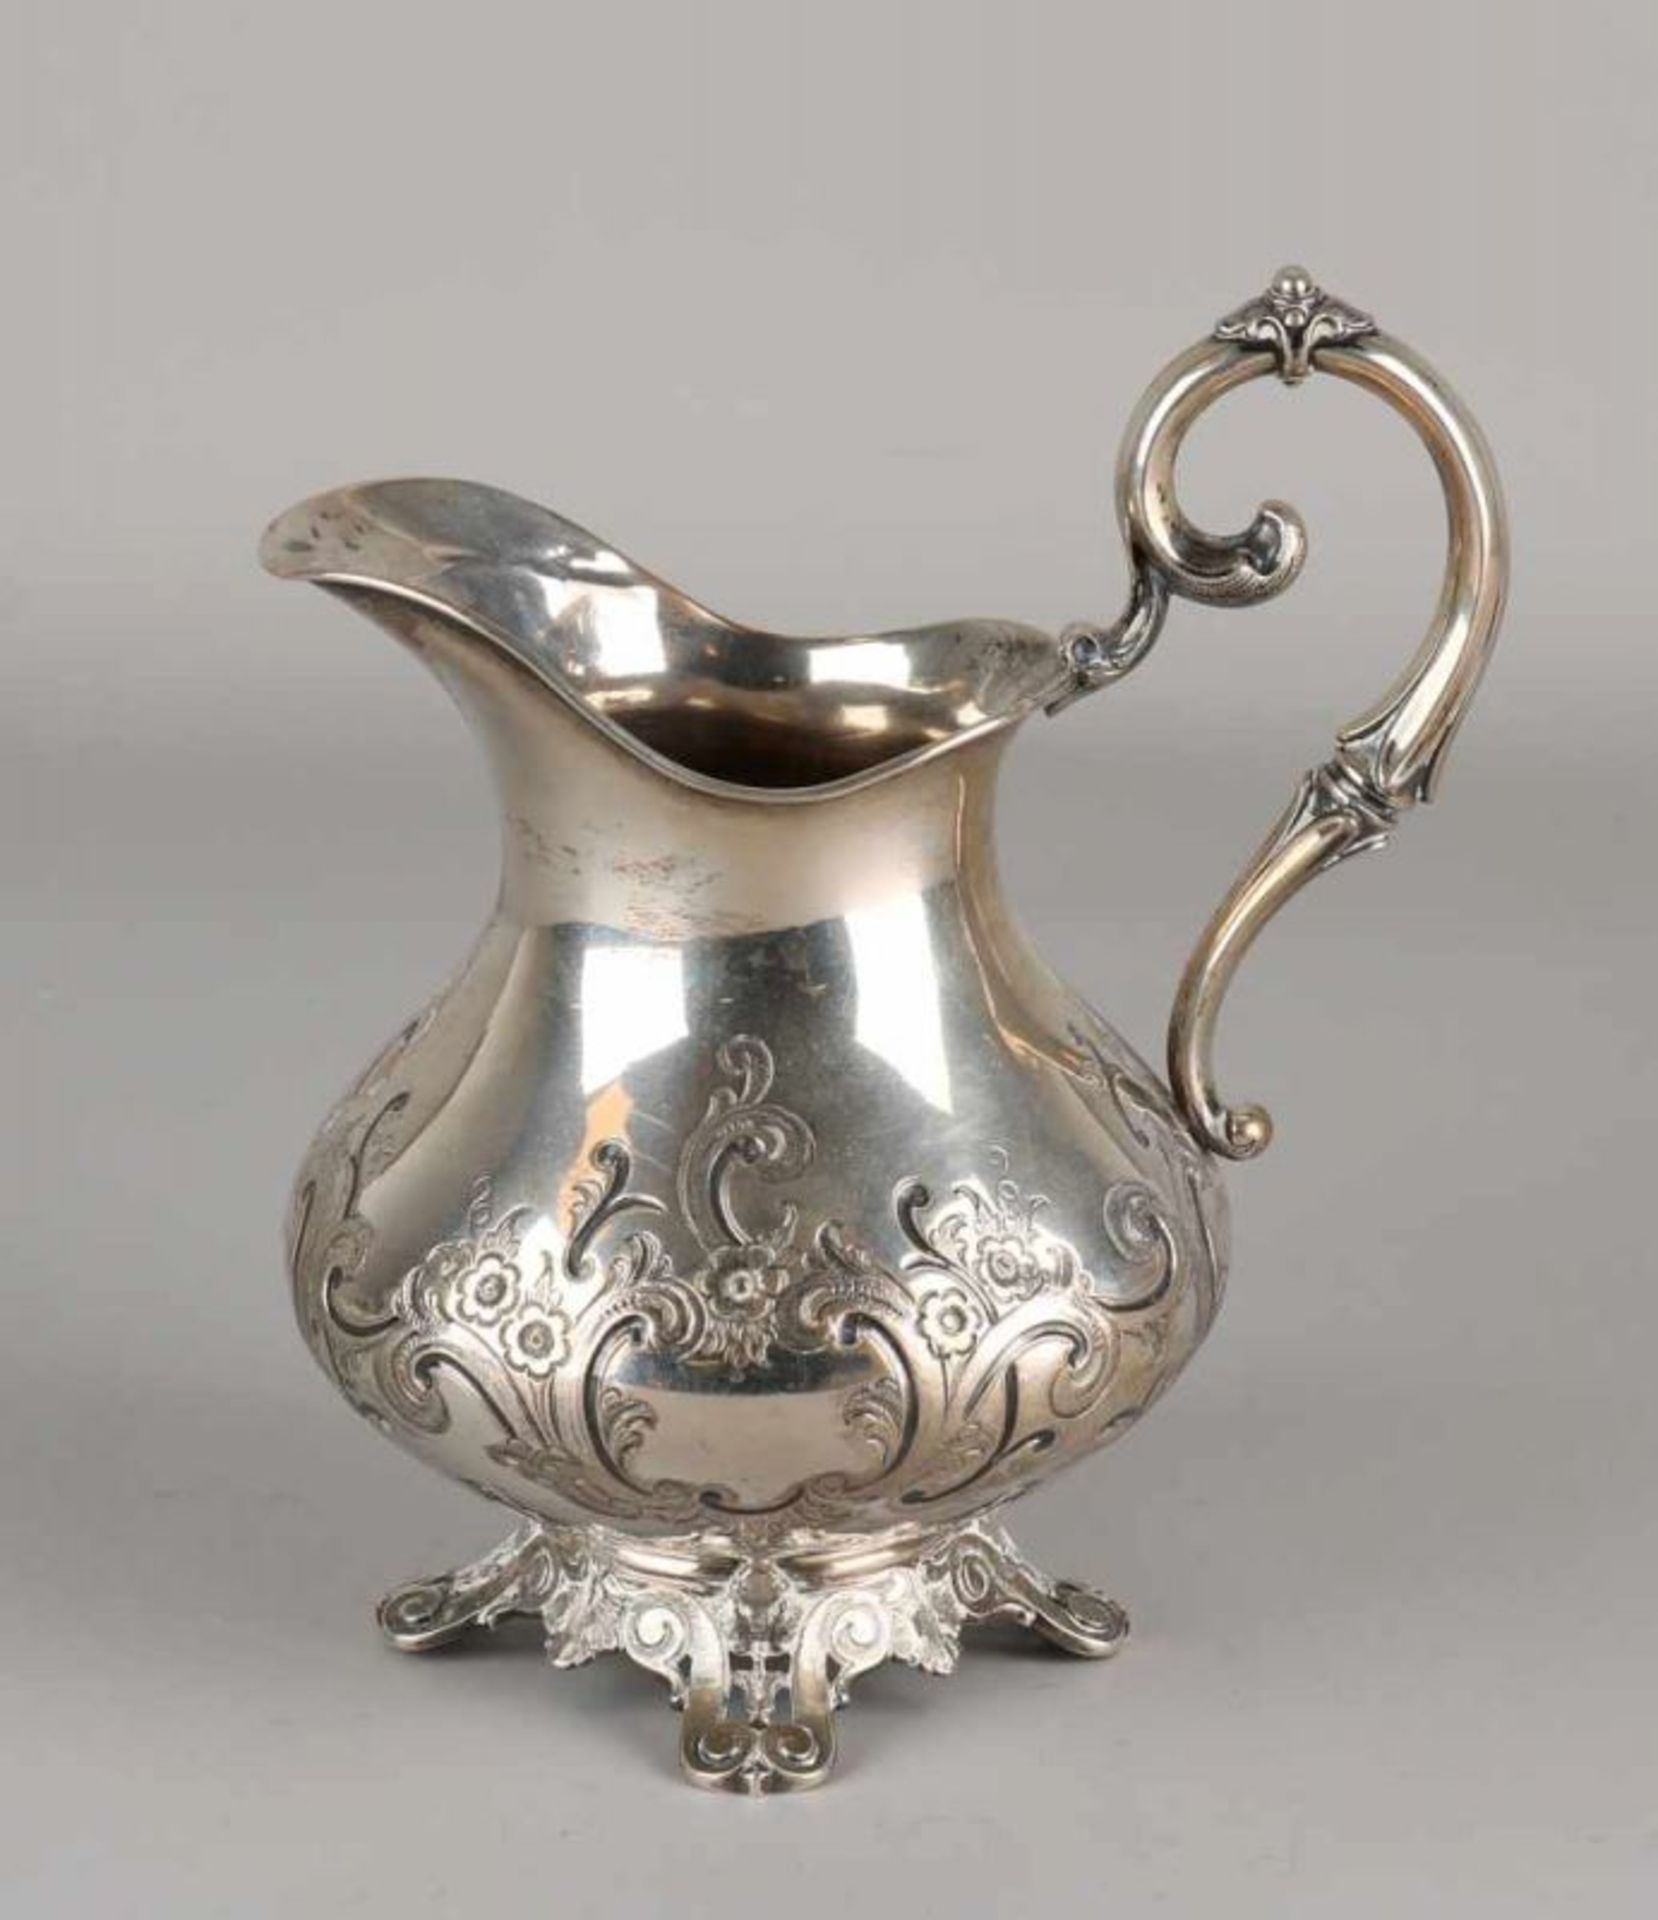 Silver milk jug, 13 lothige, 812.5 / 000, decorated with C-volutes, flattened on an openwork base